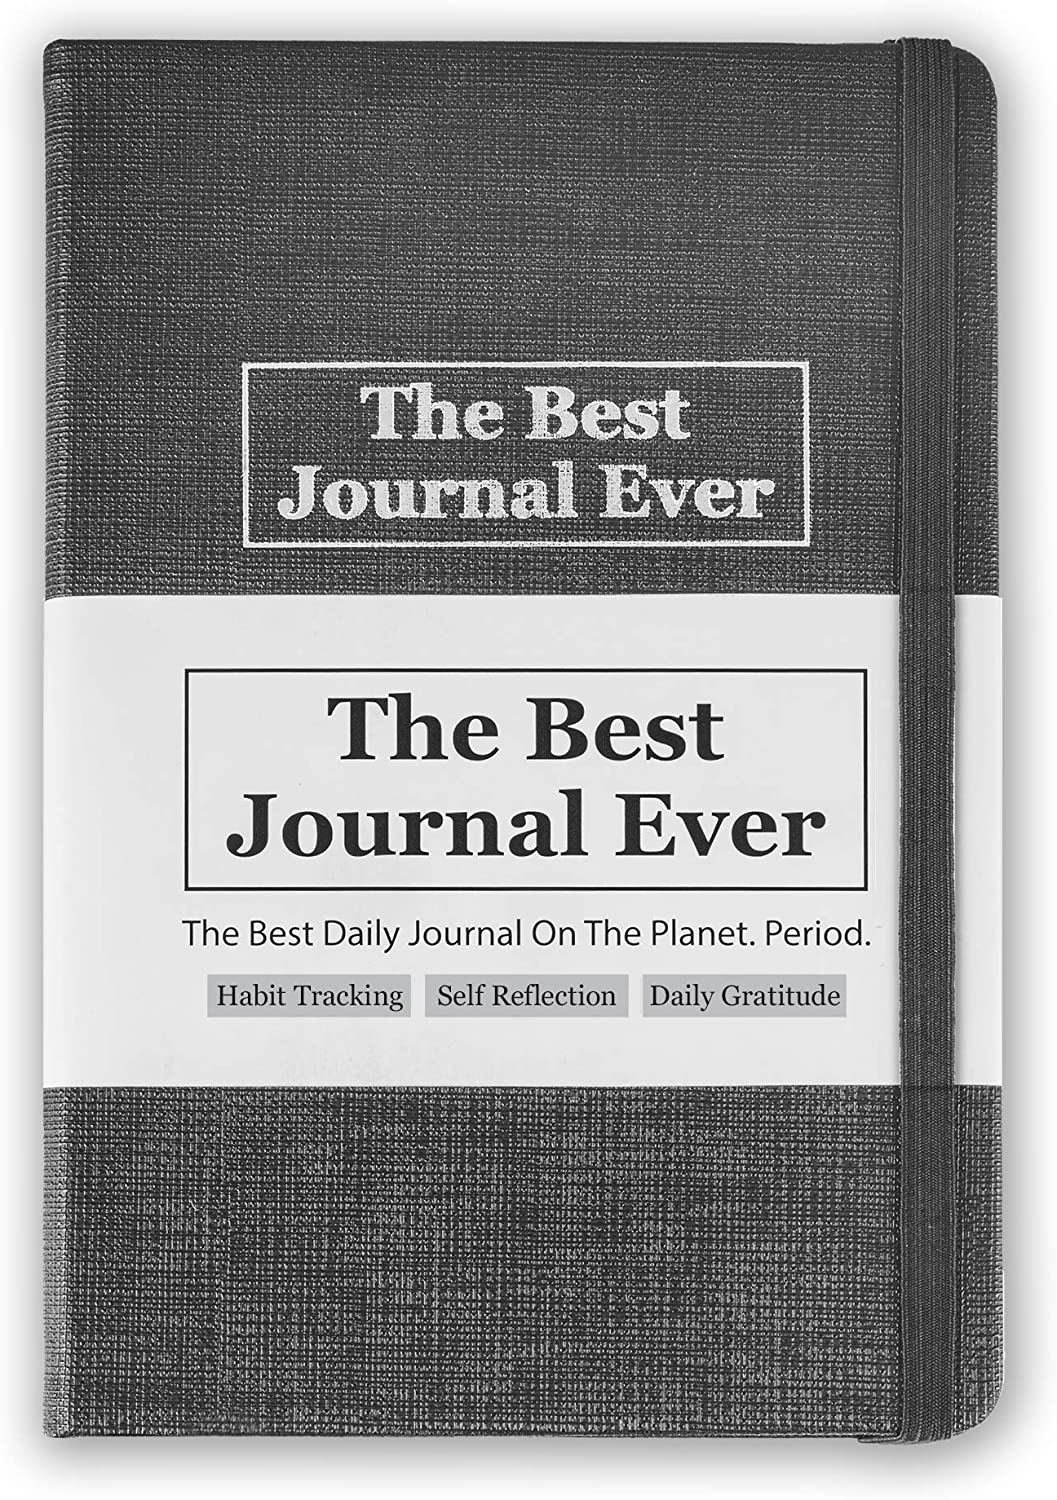 Daily Positivity Journal For Happiness, Wellness, Mindfulness & Self Care - Inspirational Journals To Write In, Writing Prompt Journal & Guided Journal Gifts For Men & Women - Hardcover Diary Notebook